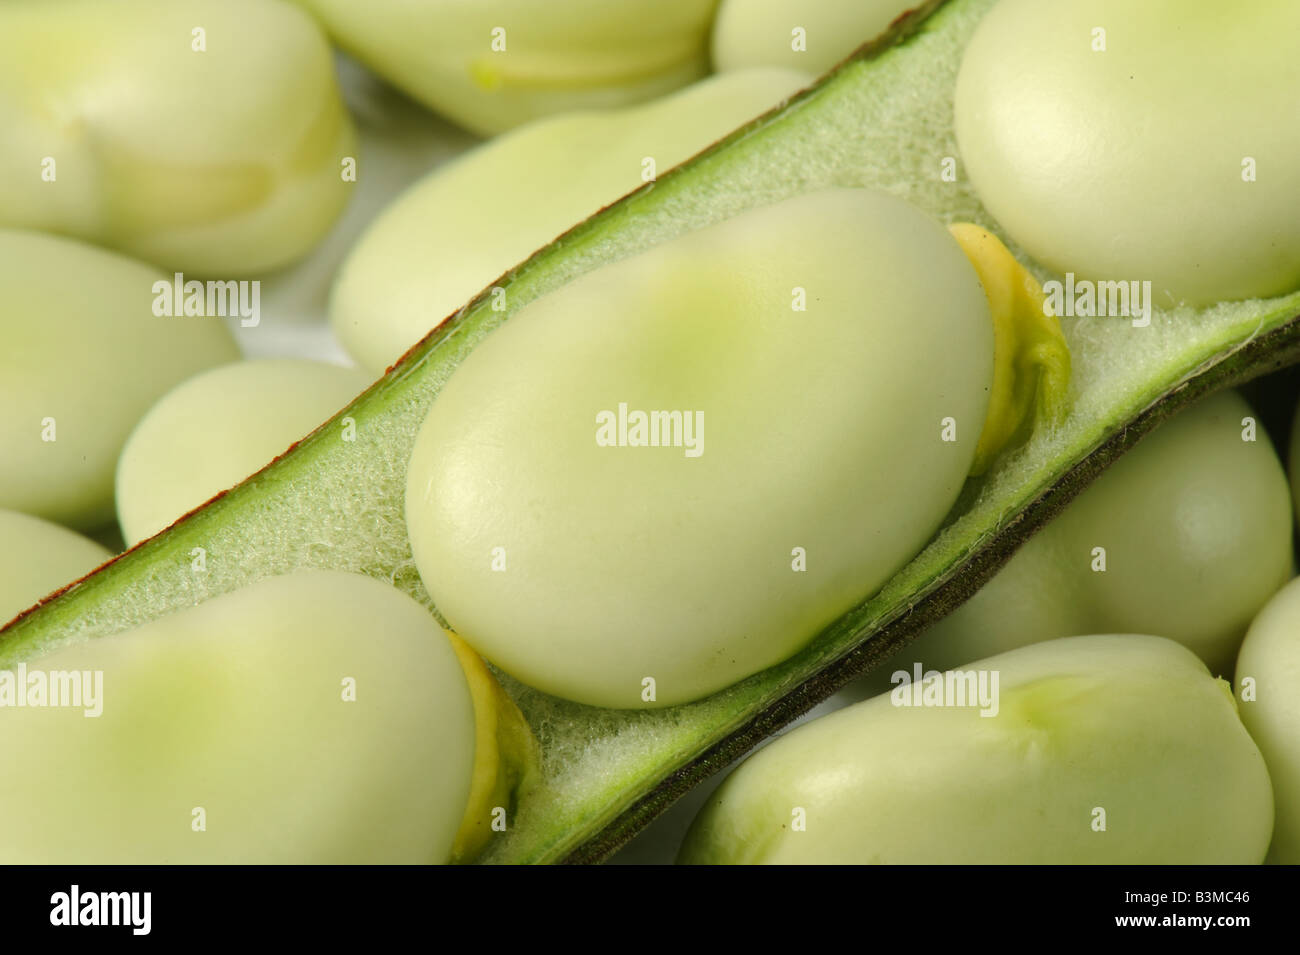 Broad bean pod opened to show mature edible beans Stock Photo